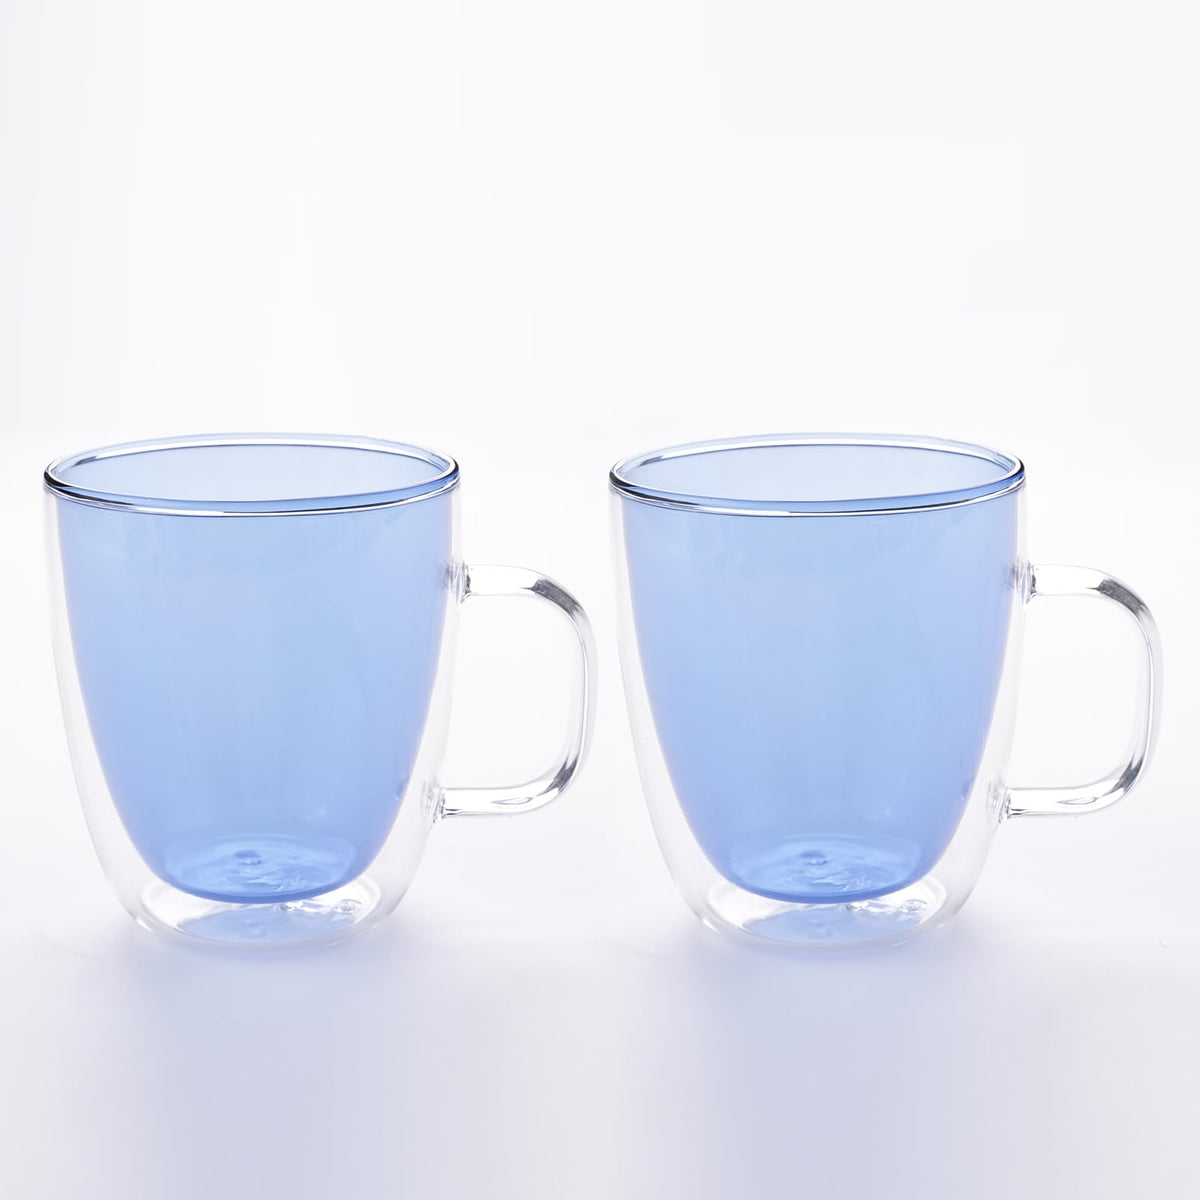 UMAI Double Walled Glass Coffee Mug Set of 2-400ml | Borosilicate Glass Teacups | High Thermal Resistance | Microwave & Dishwasher Safe | Gifting Pack for Friends & Family | Blue